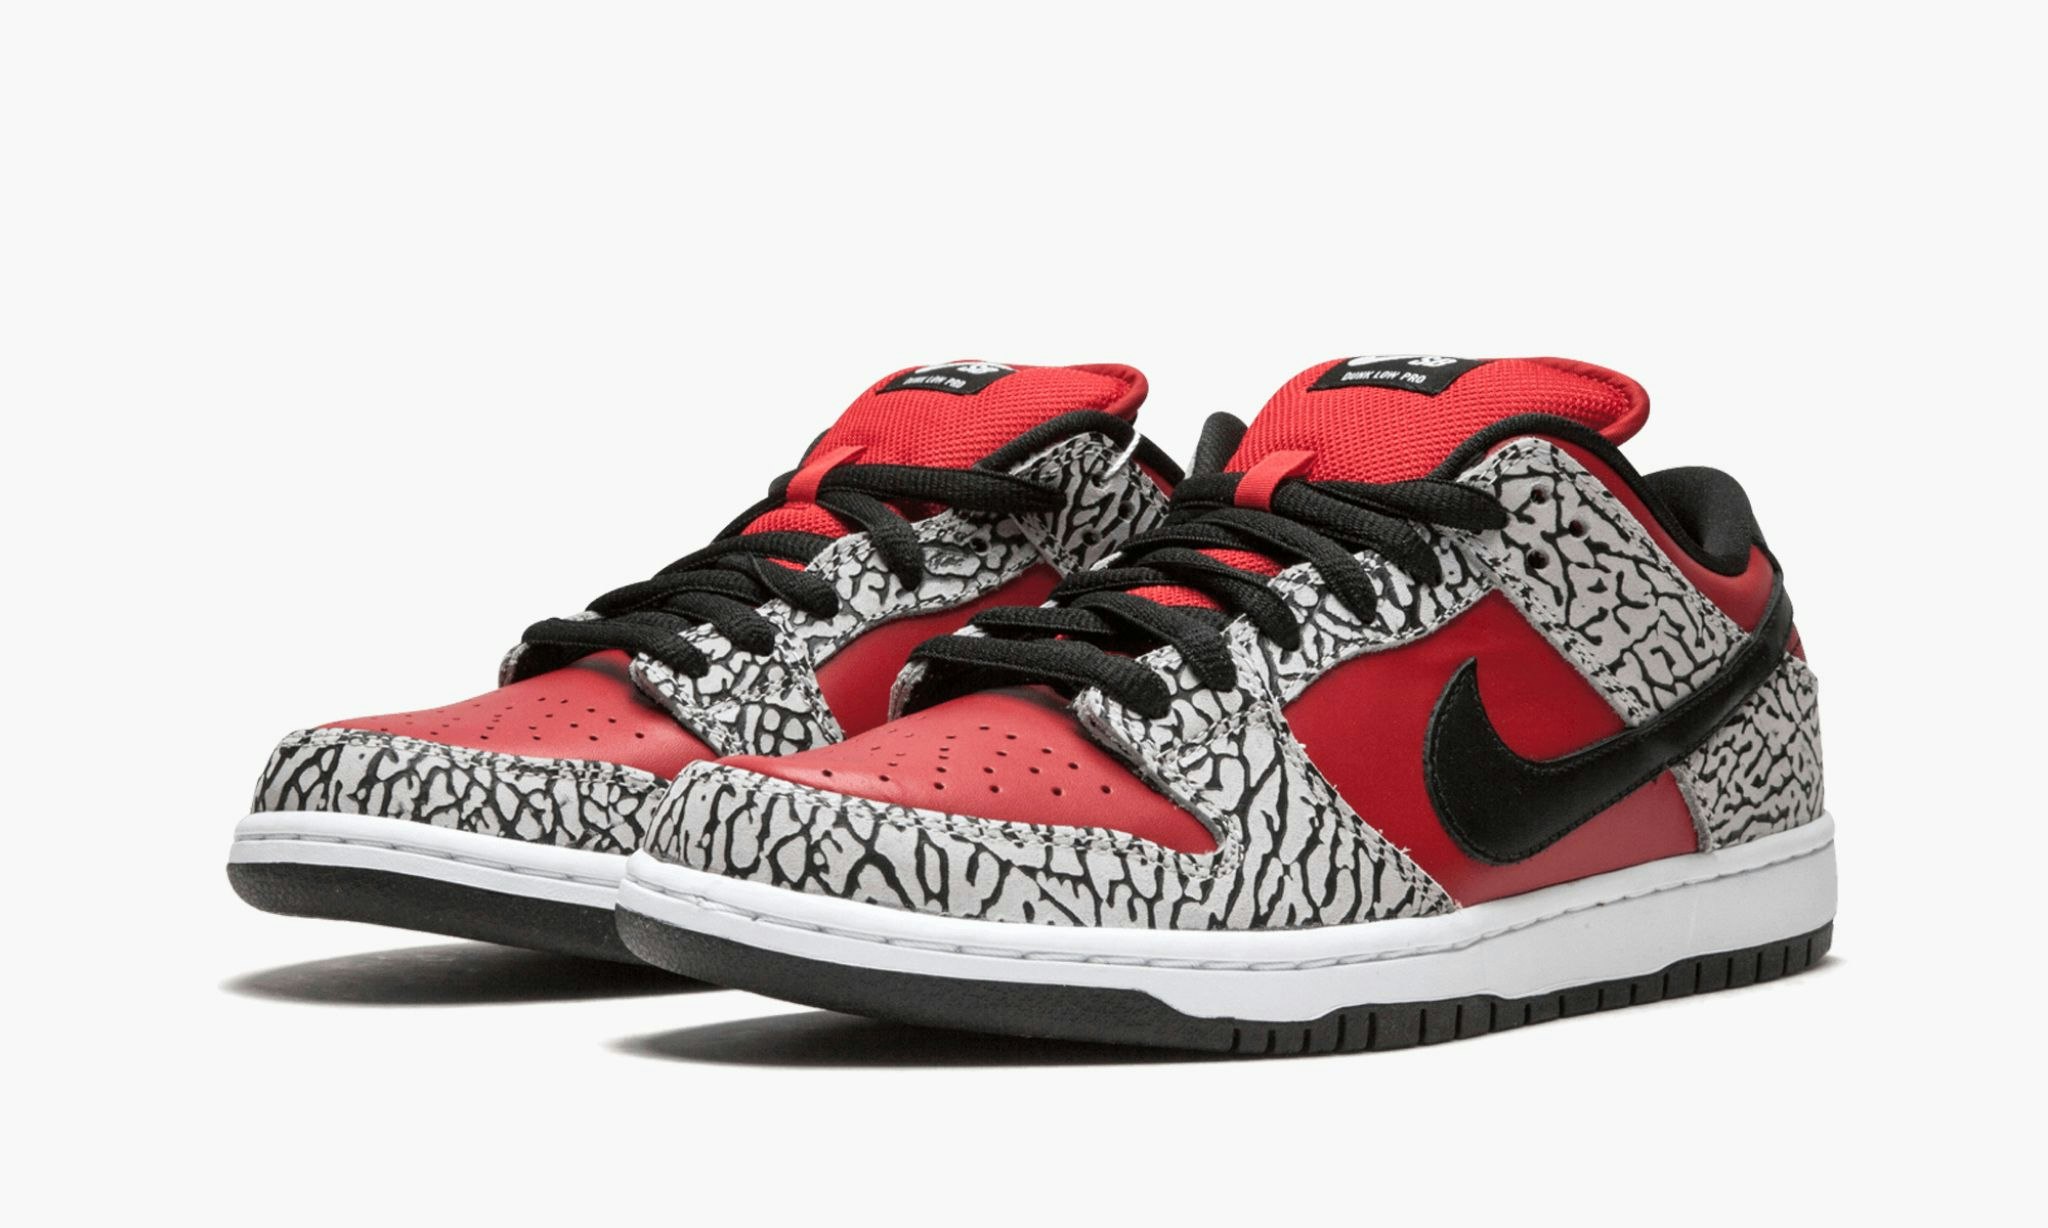 Supreme x Nike SB Dunk Low "Red Cement"